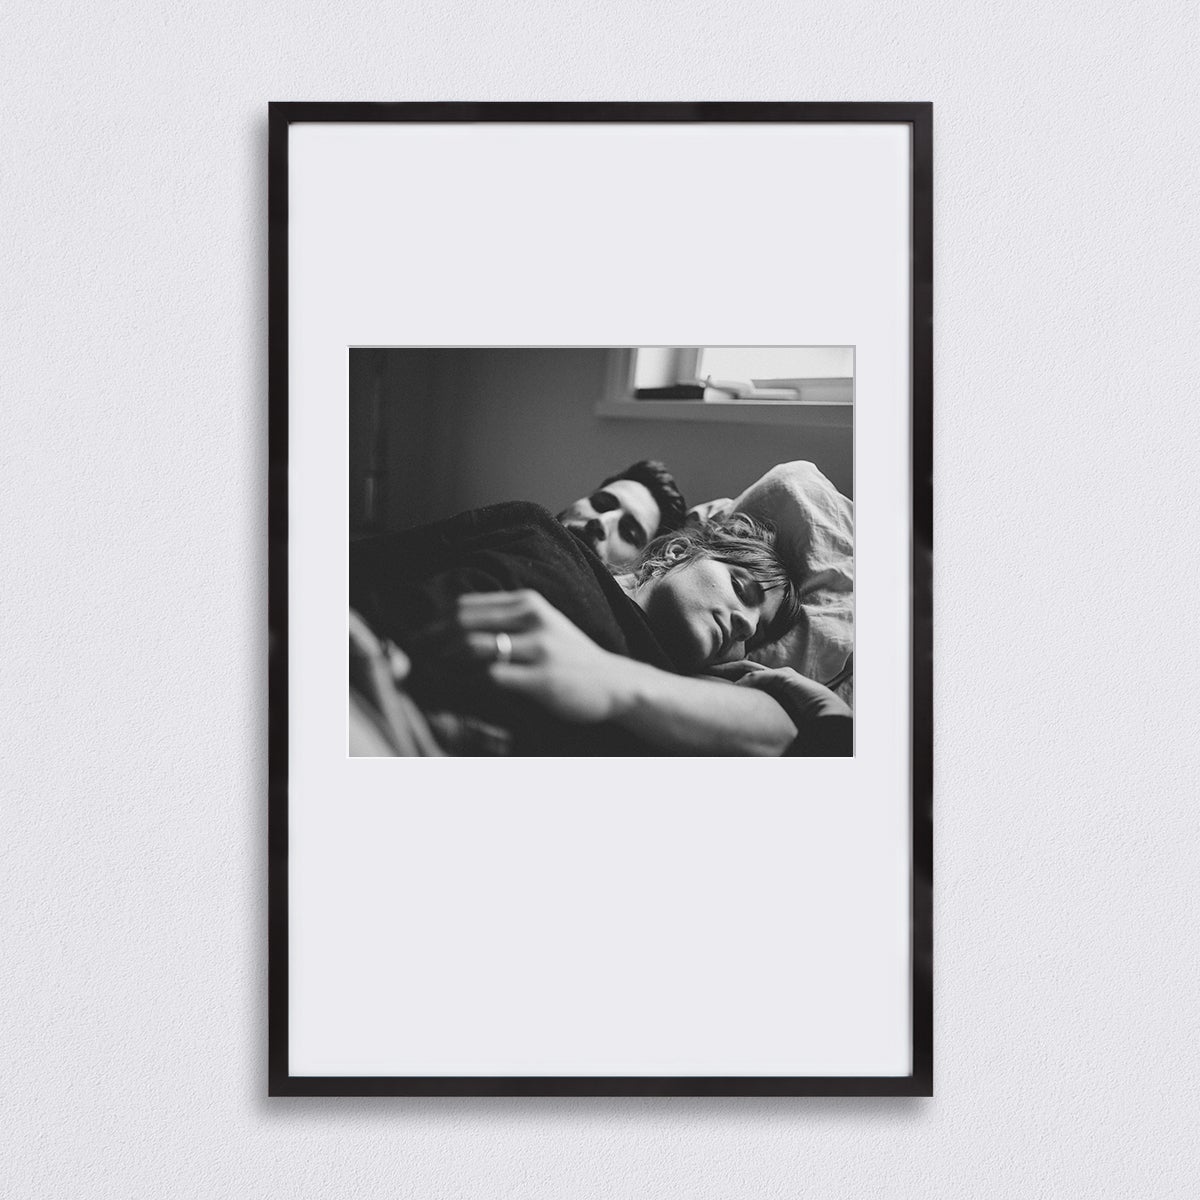 Black and white selfie of couple laying in bed matted to 16 x 13 inch inside of a Black 20 x 30 inch Artifact Uprising Gallery Frame